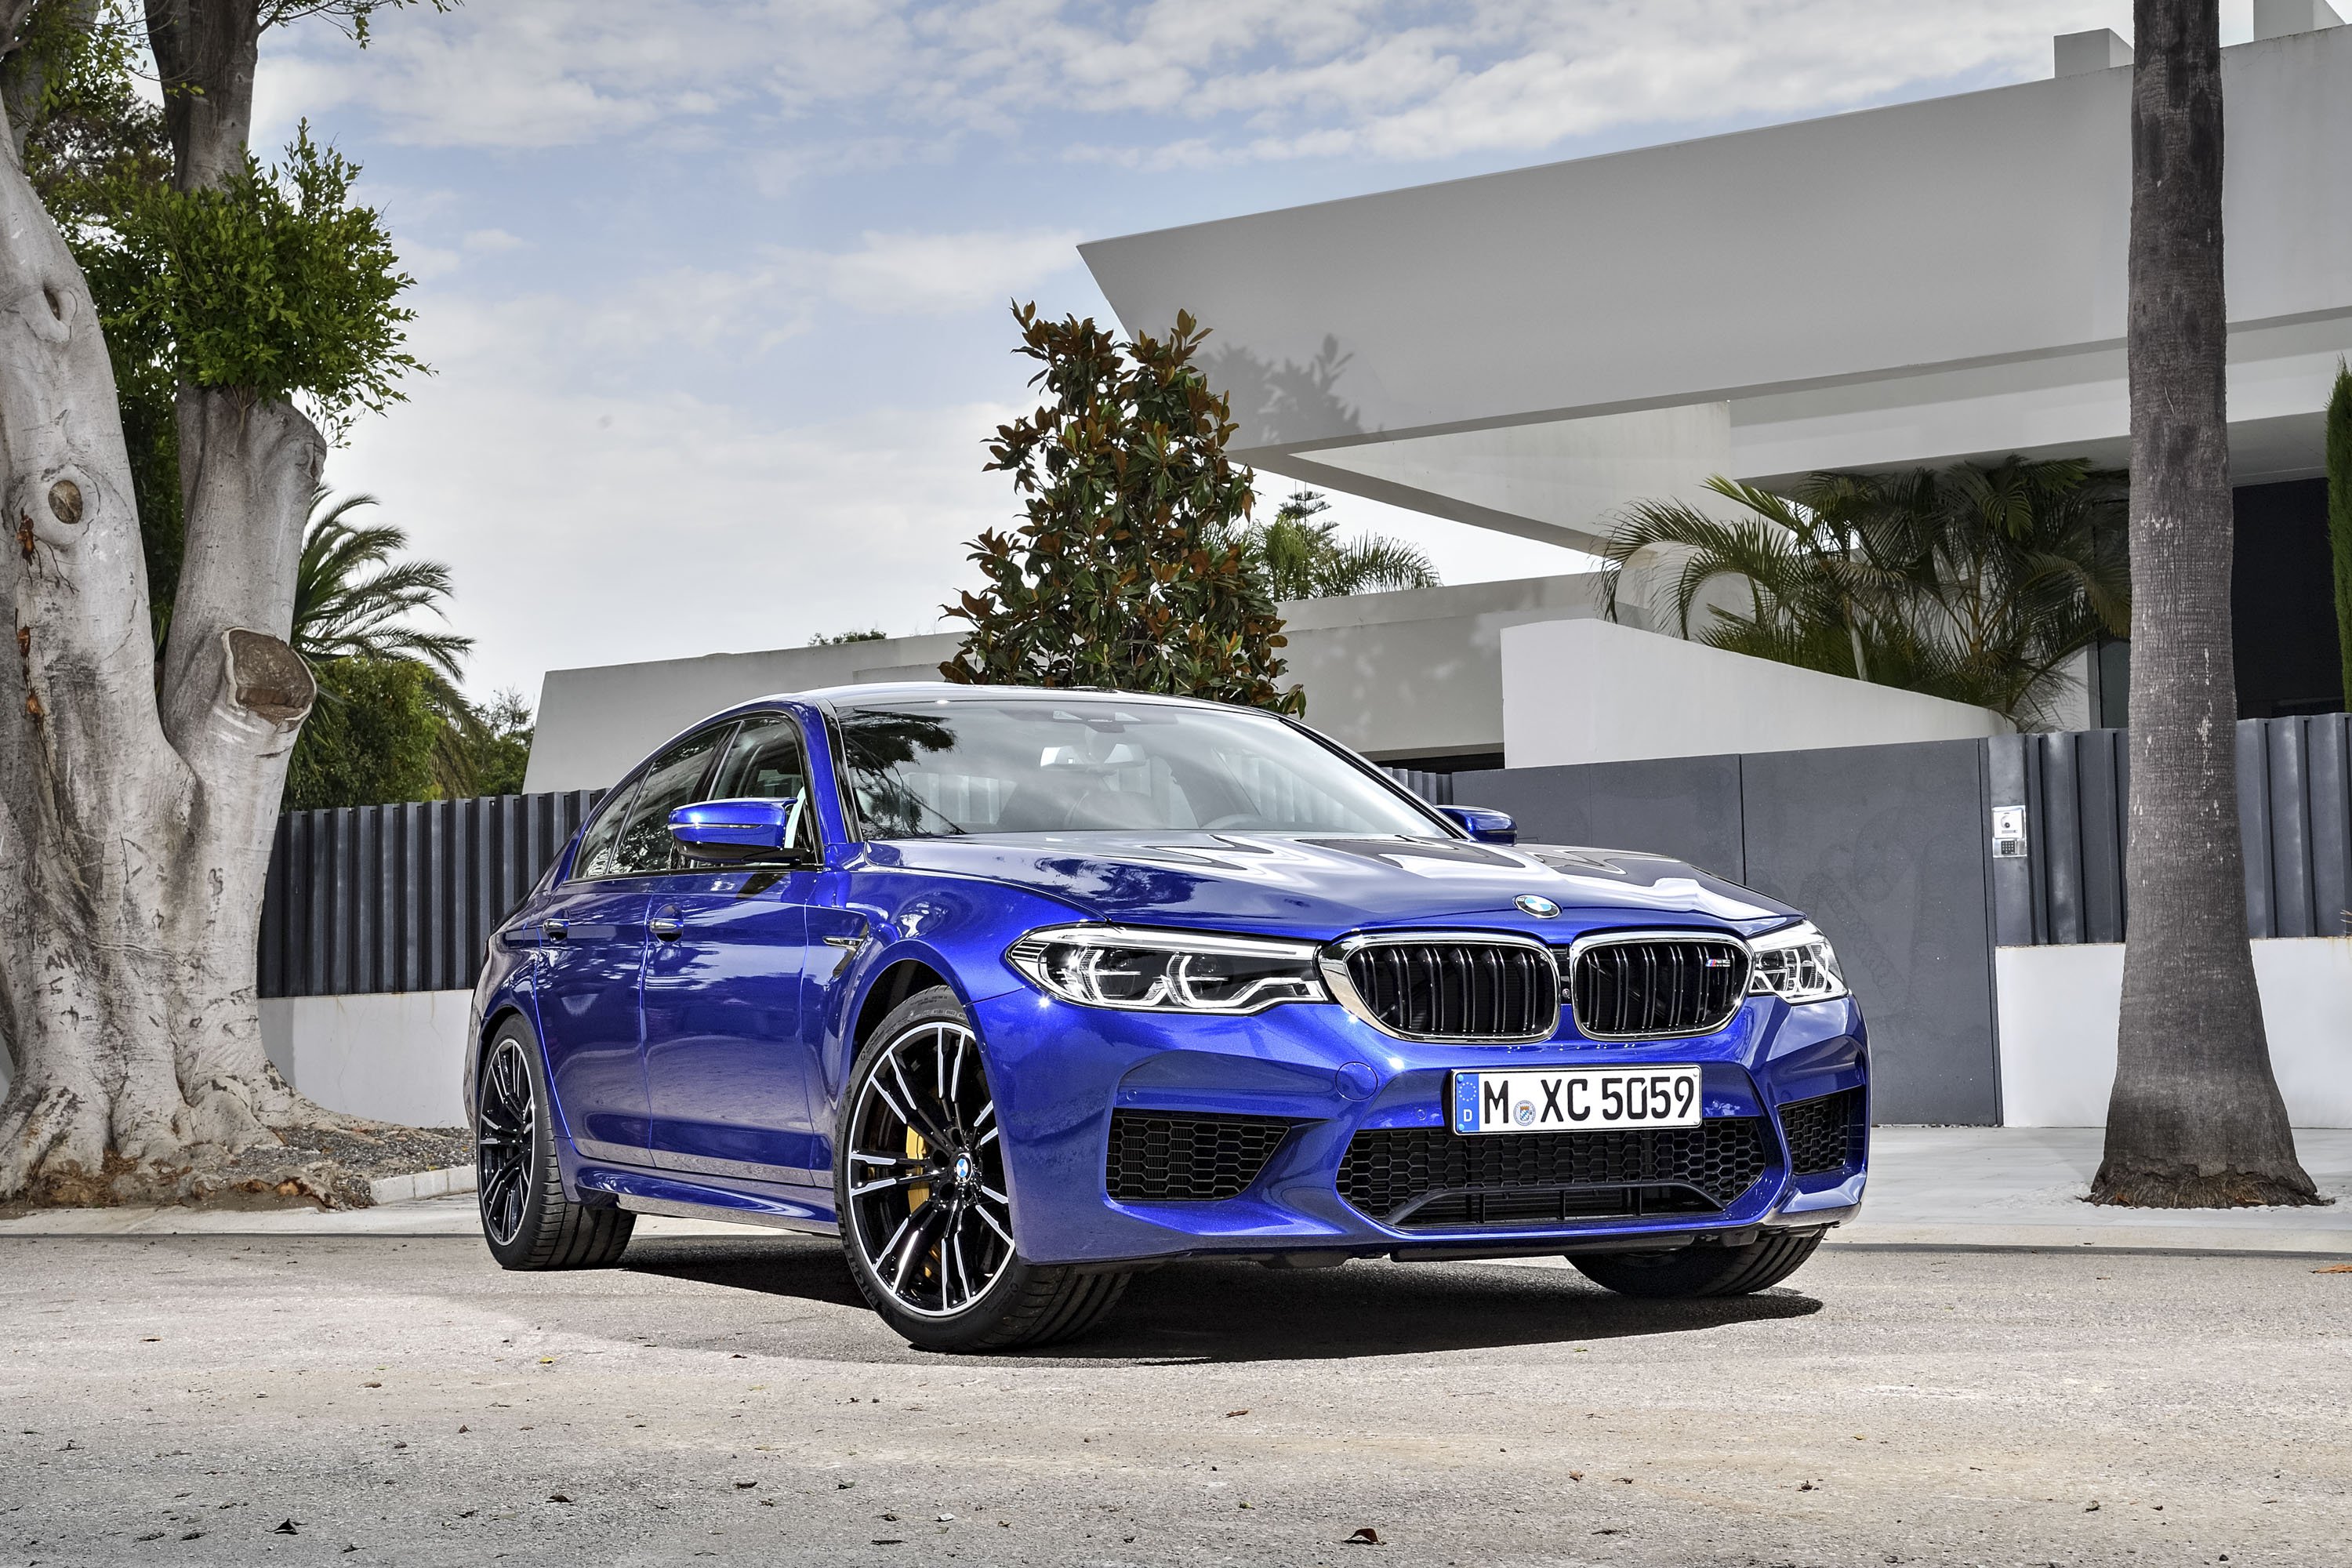 Wallpaper Of The Day: 2018 BMW M5